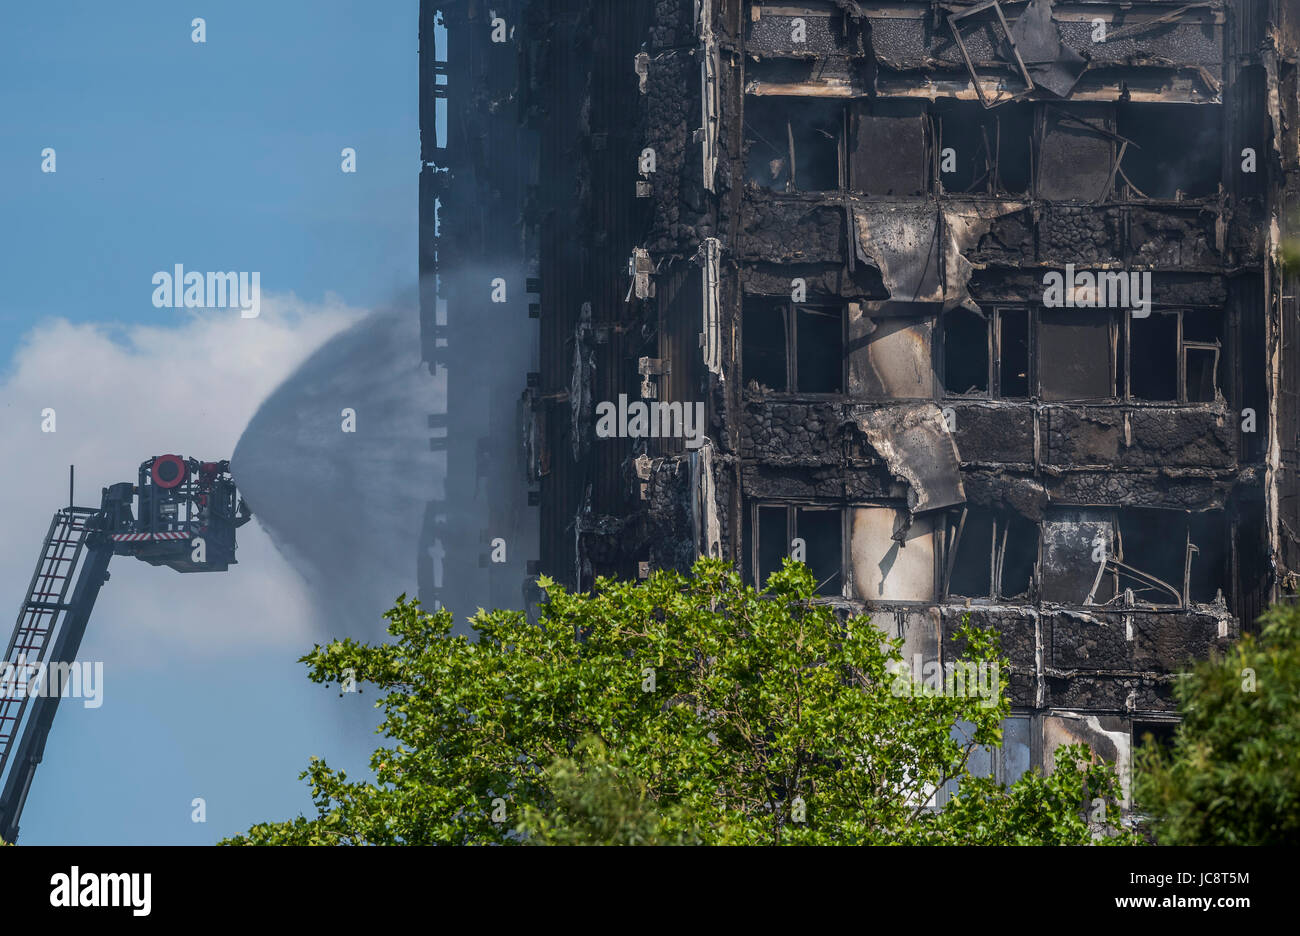 London, UK. 14th June, 2017. The fire service water jet hoses down the building but only reaches about half way up. Grenfell Tower - The charred remains of the tower block that caught fire last night in North Kensington near Latimer Road tube station. London 14 June 2017. Credit: Guy Bell/Alamy Live News Stock Photo